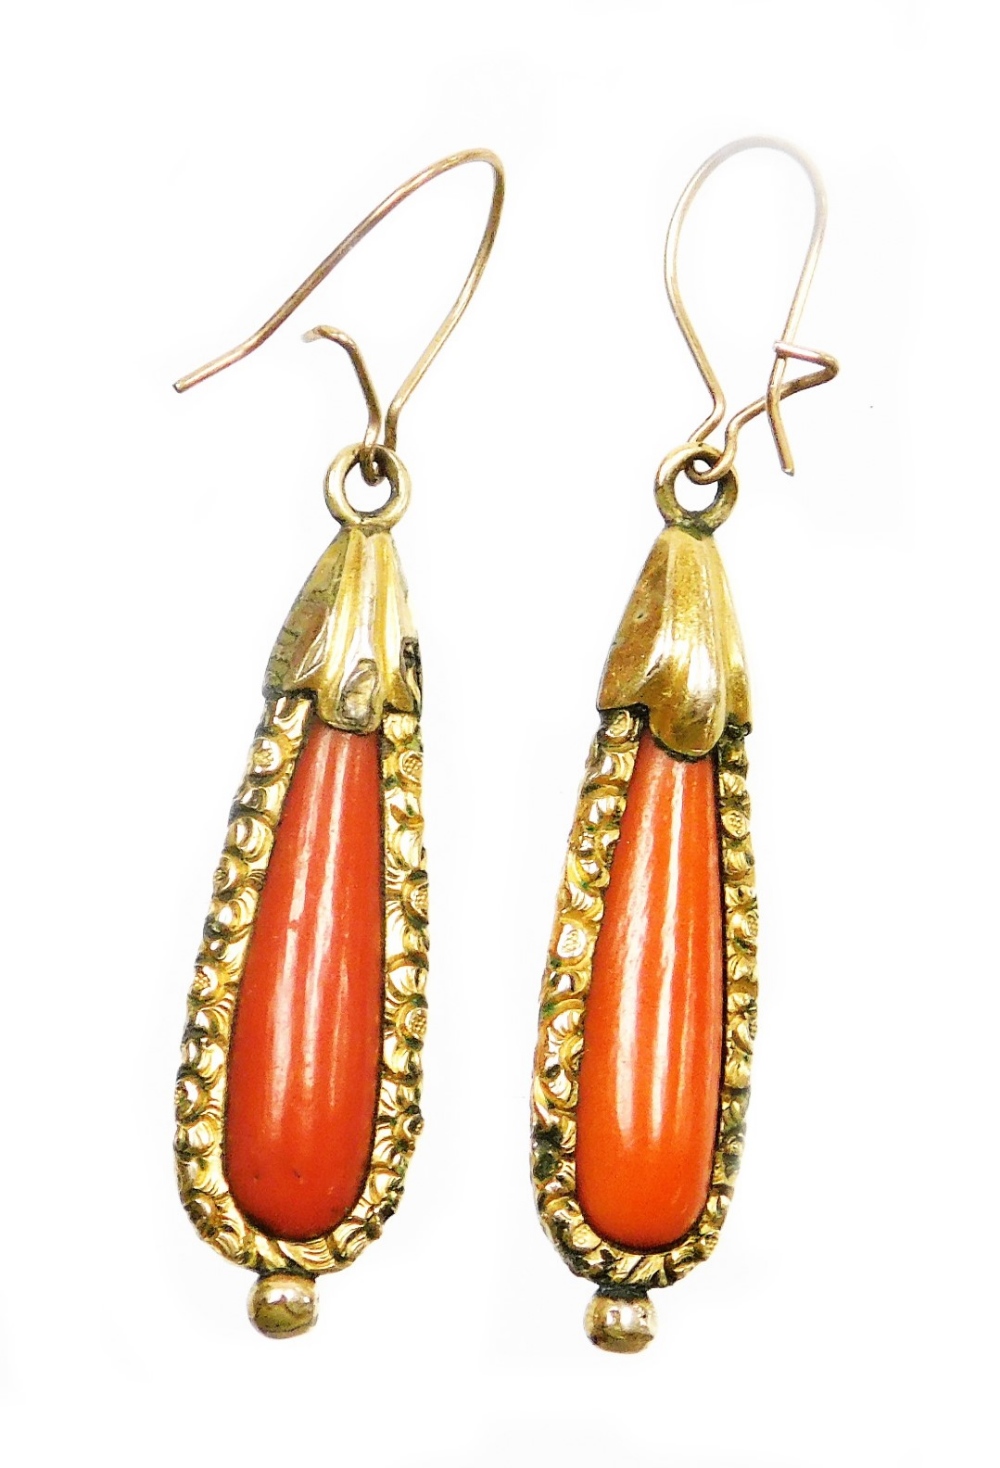 A pair of early to mid 20thC coral drop earrings, each with tear drop shaped coral centre and a gold